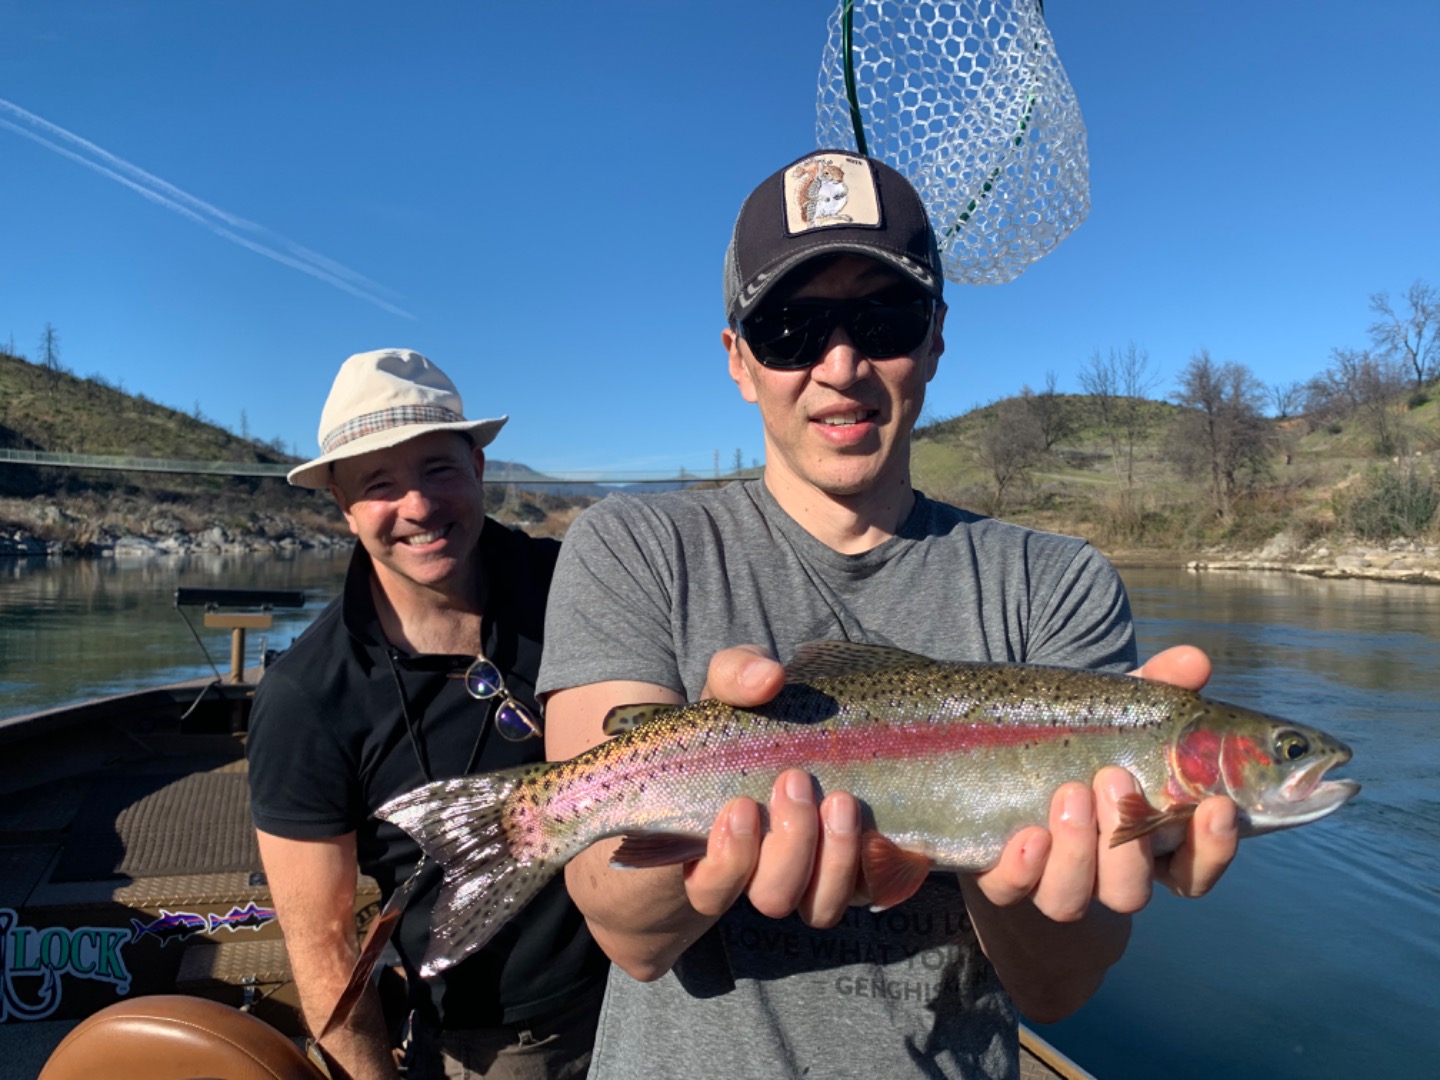 Trout fishing on the river